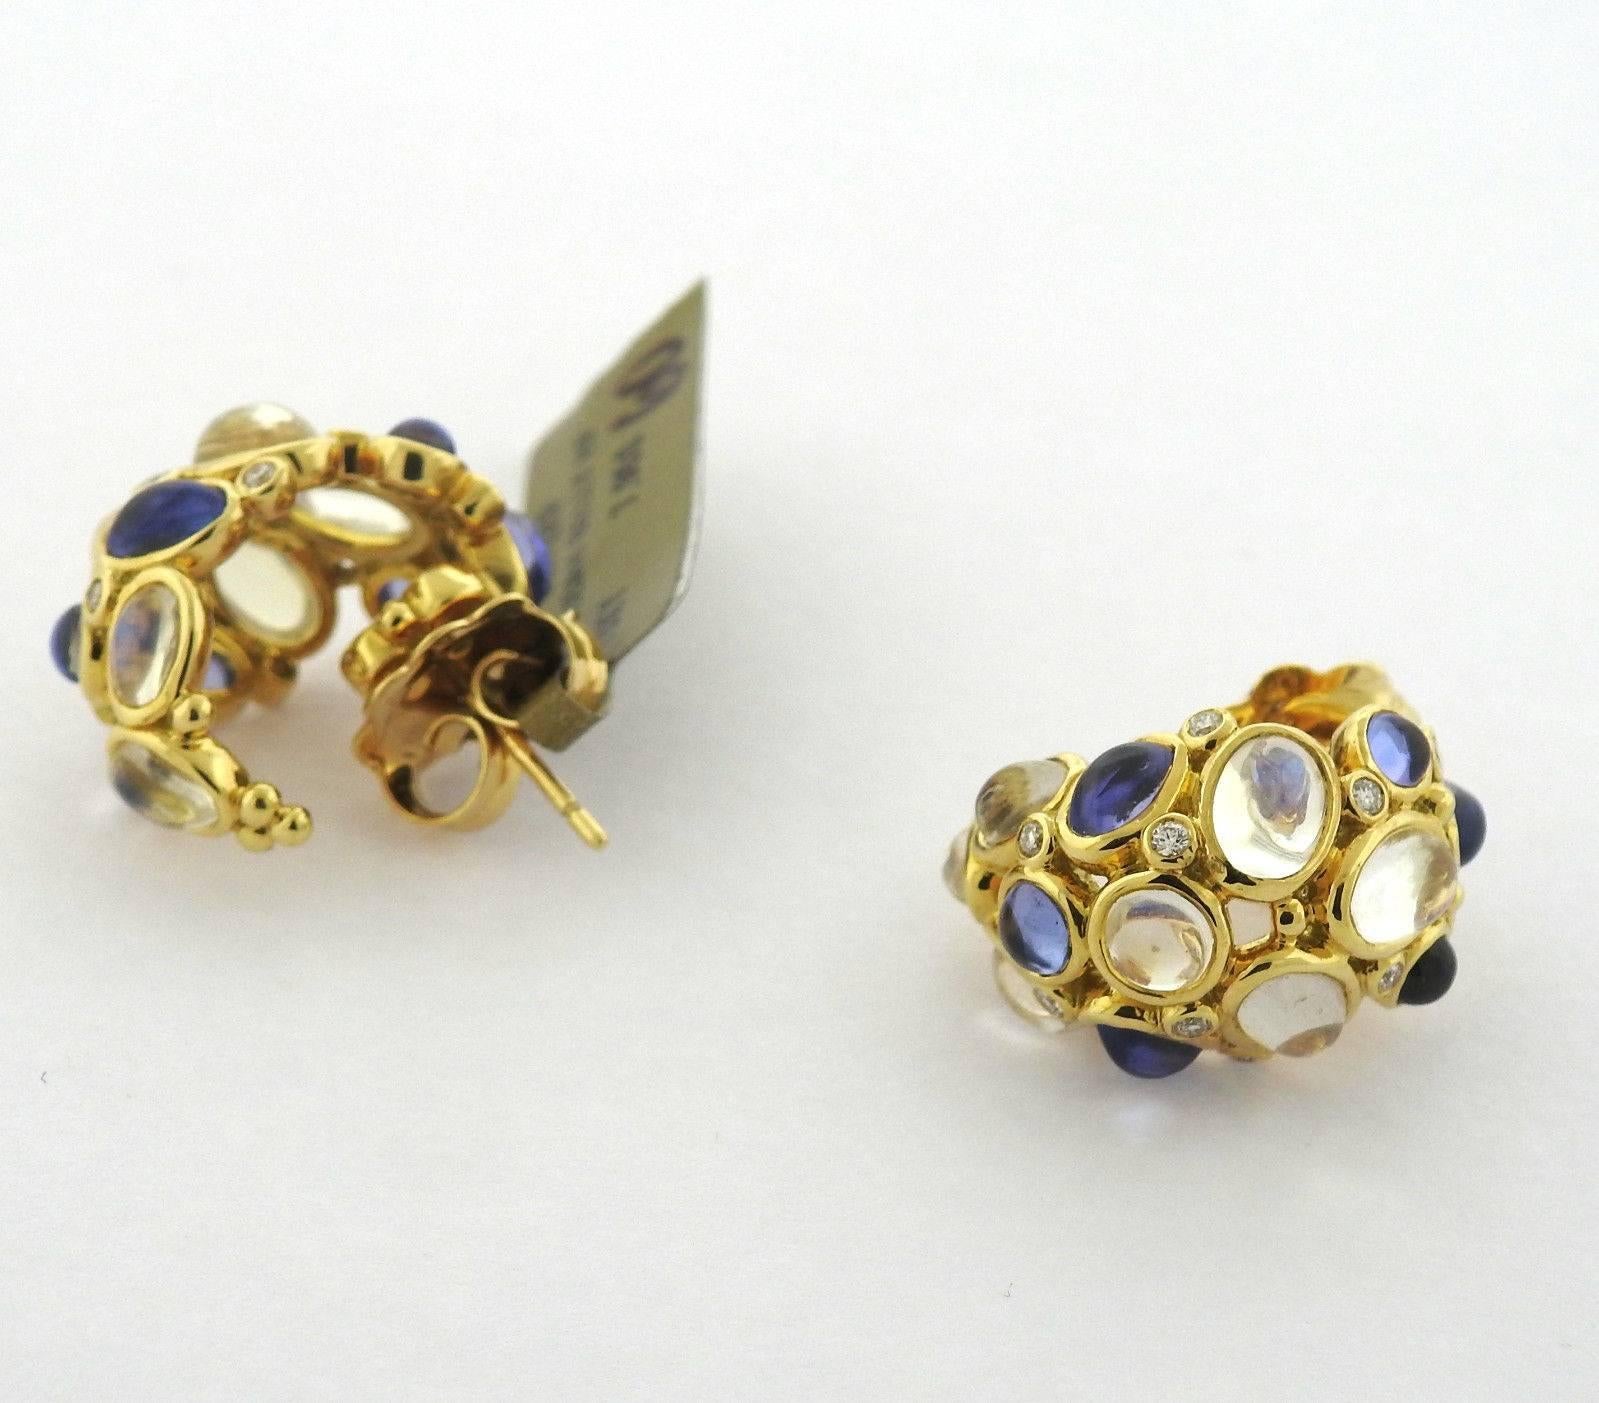 A pair of 18k yellow gold earrings set with tanzanite, moonstone, and approximately 0.08ctw of G/VS diamonds. The earrings measure 20mm x 15mm  and weigh 12.5 grams.  Marked: Temple mark, 750.  The retail of these earrings is $7950.